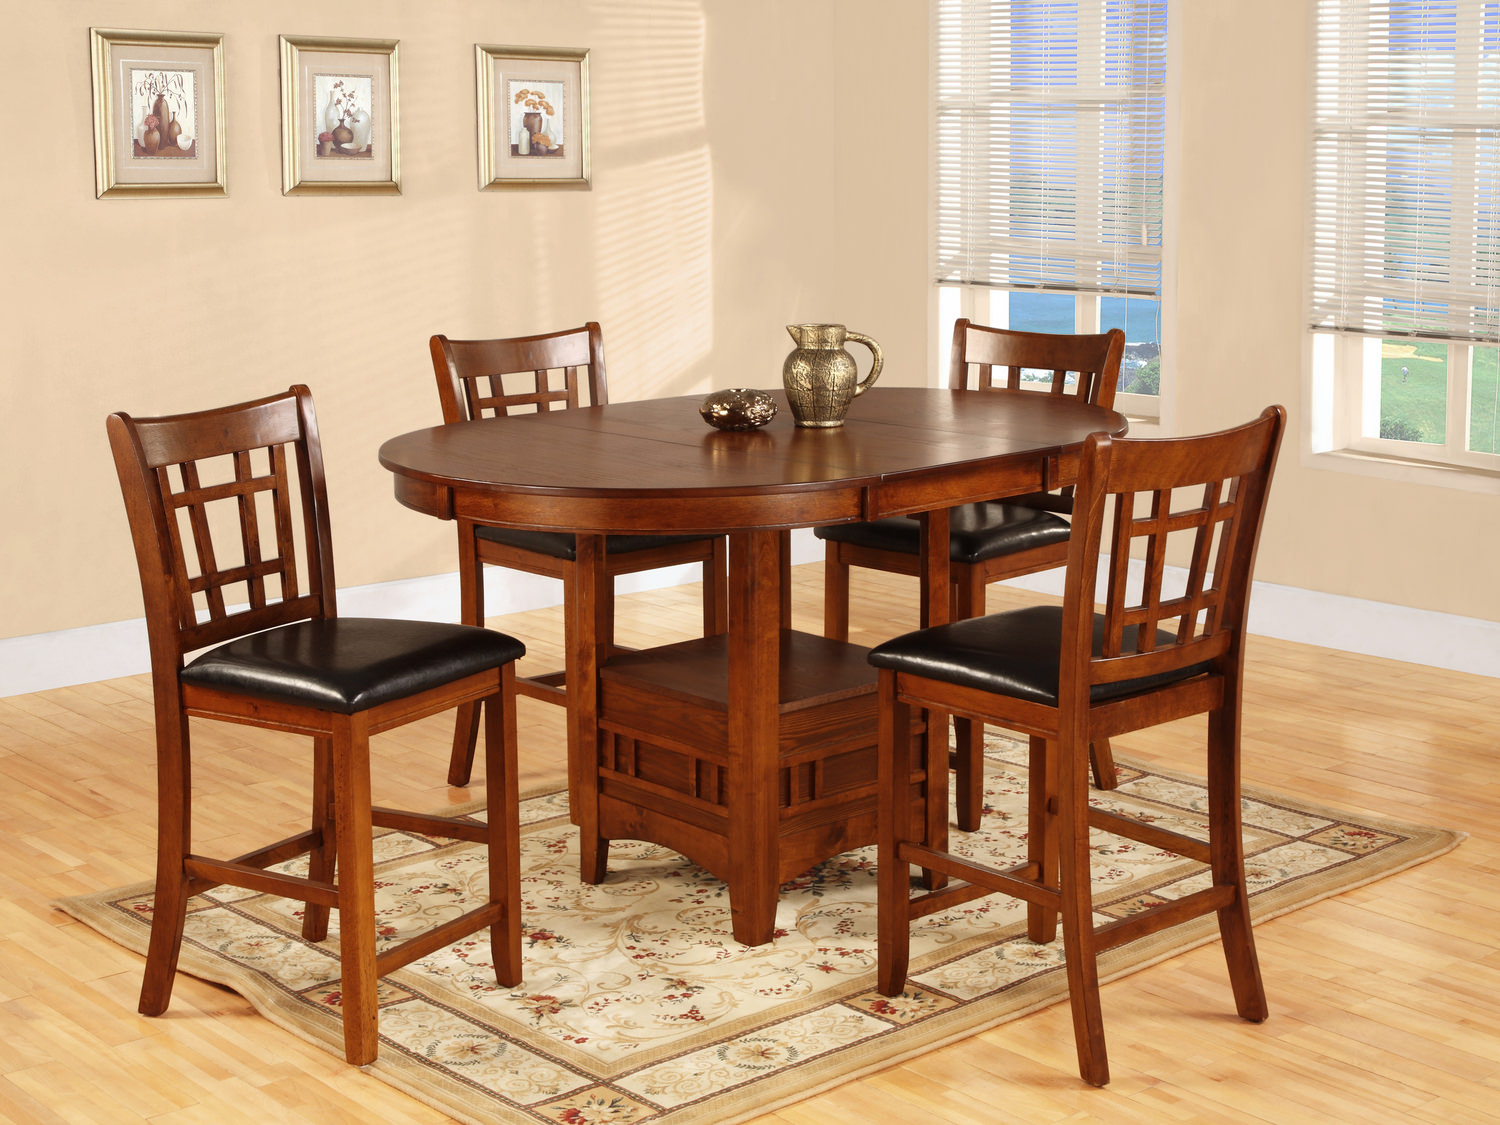 Mission Park Counter Table And 4 Counter Stools